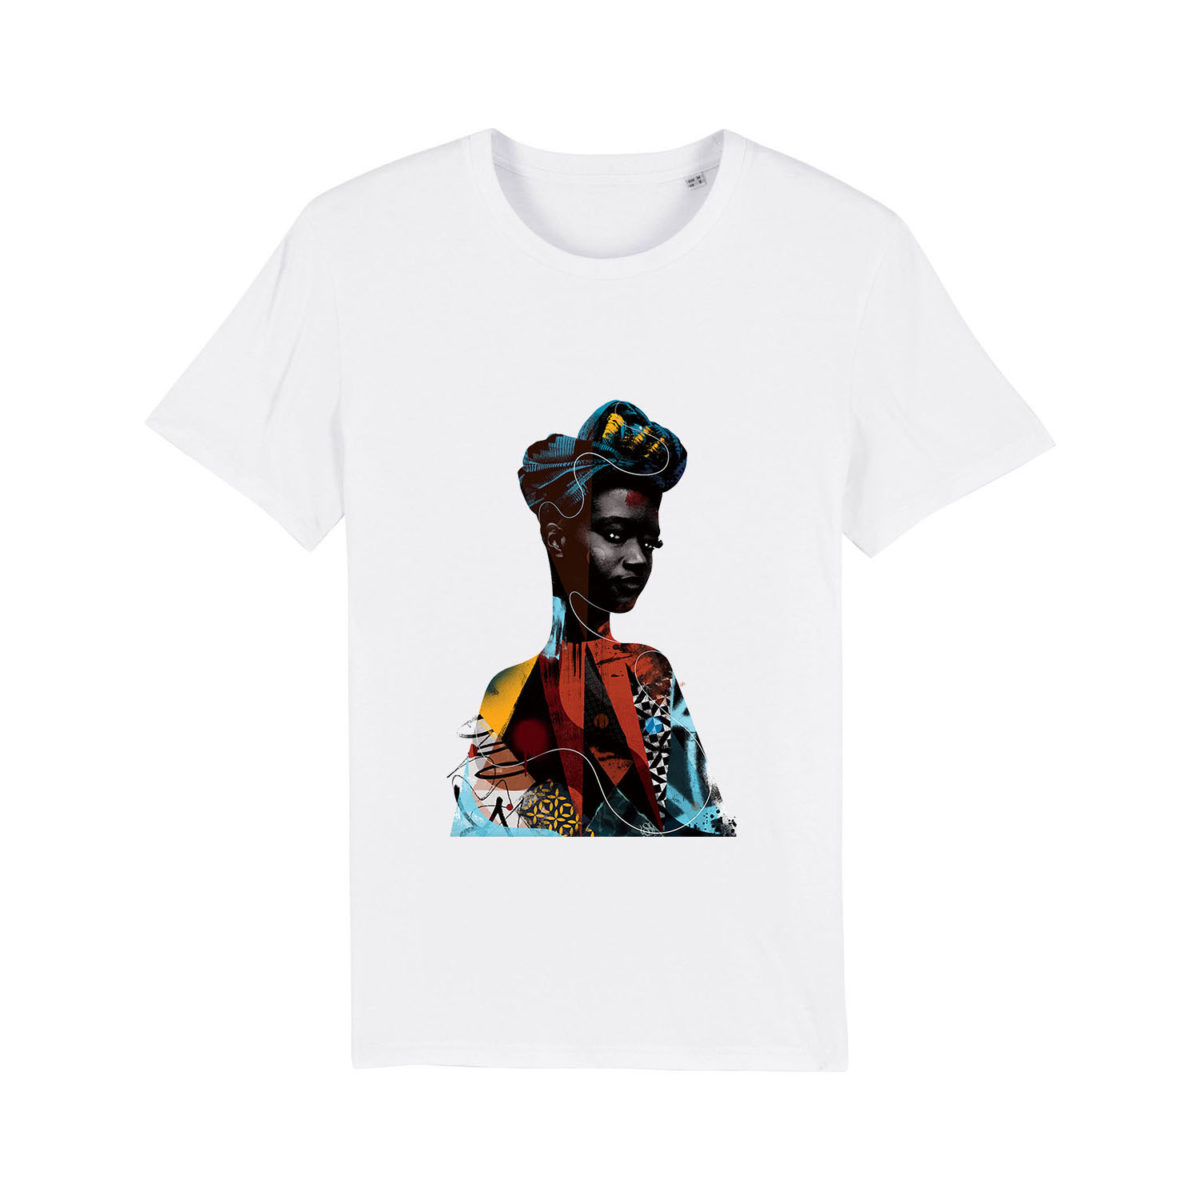 T-shirt – “Lady Africa”